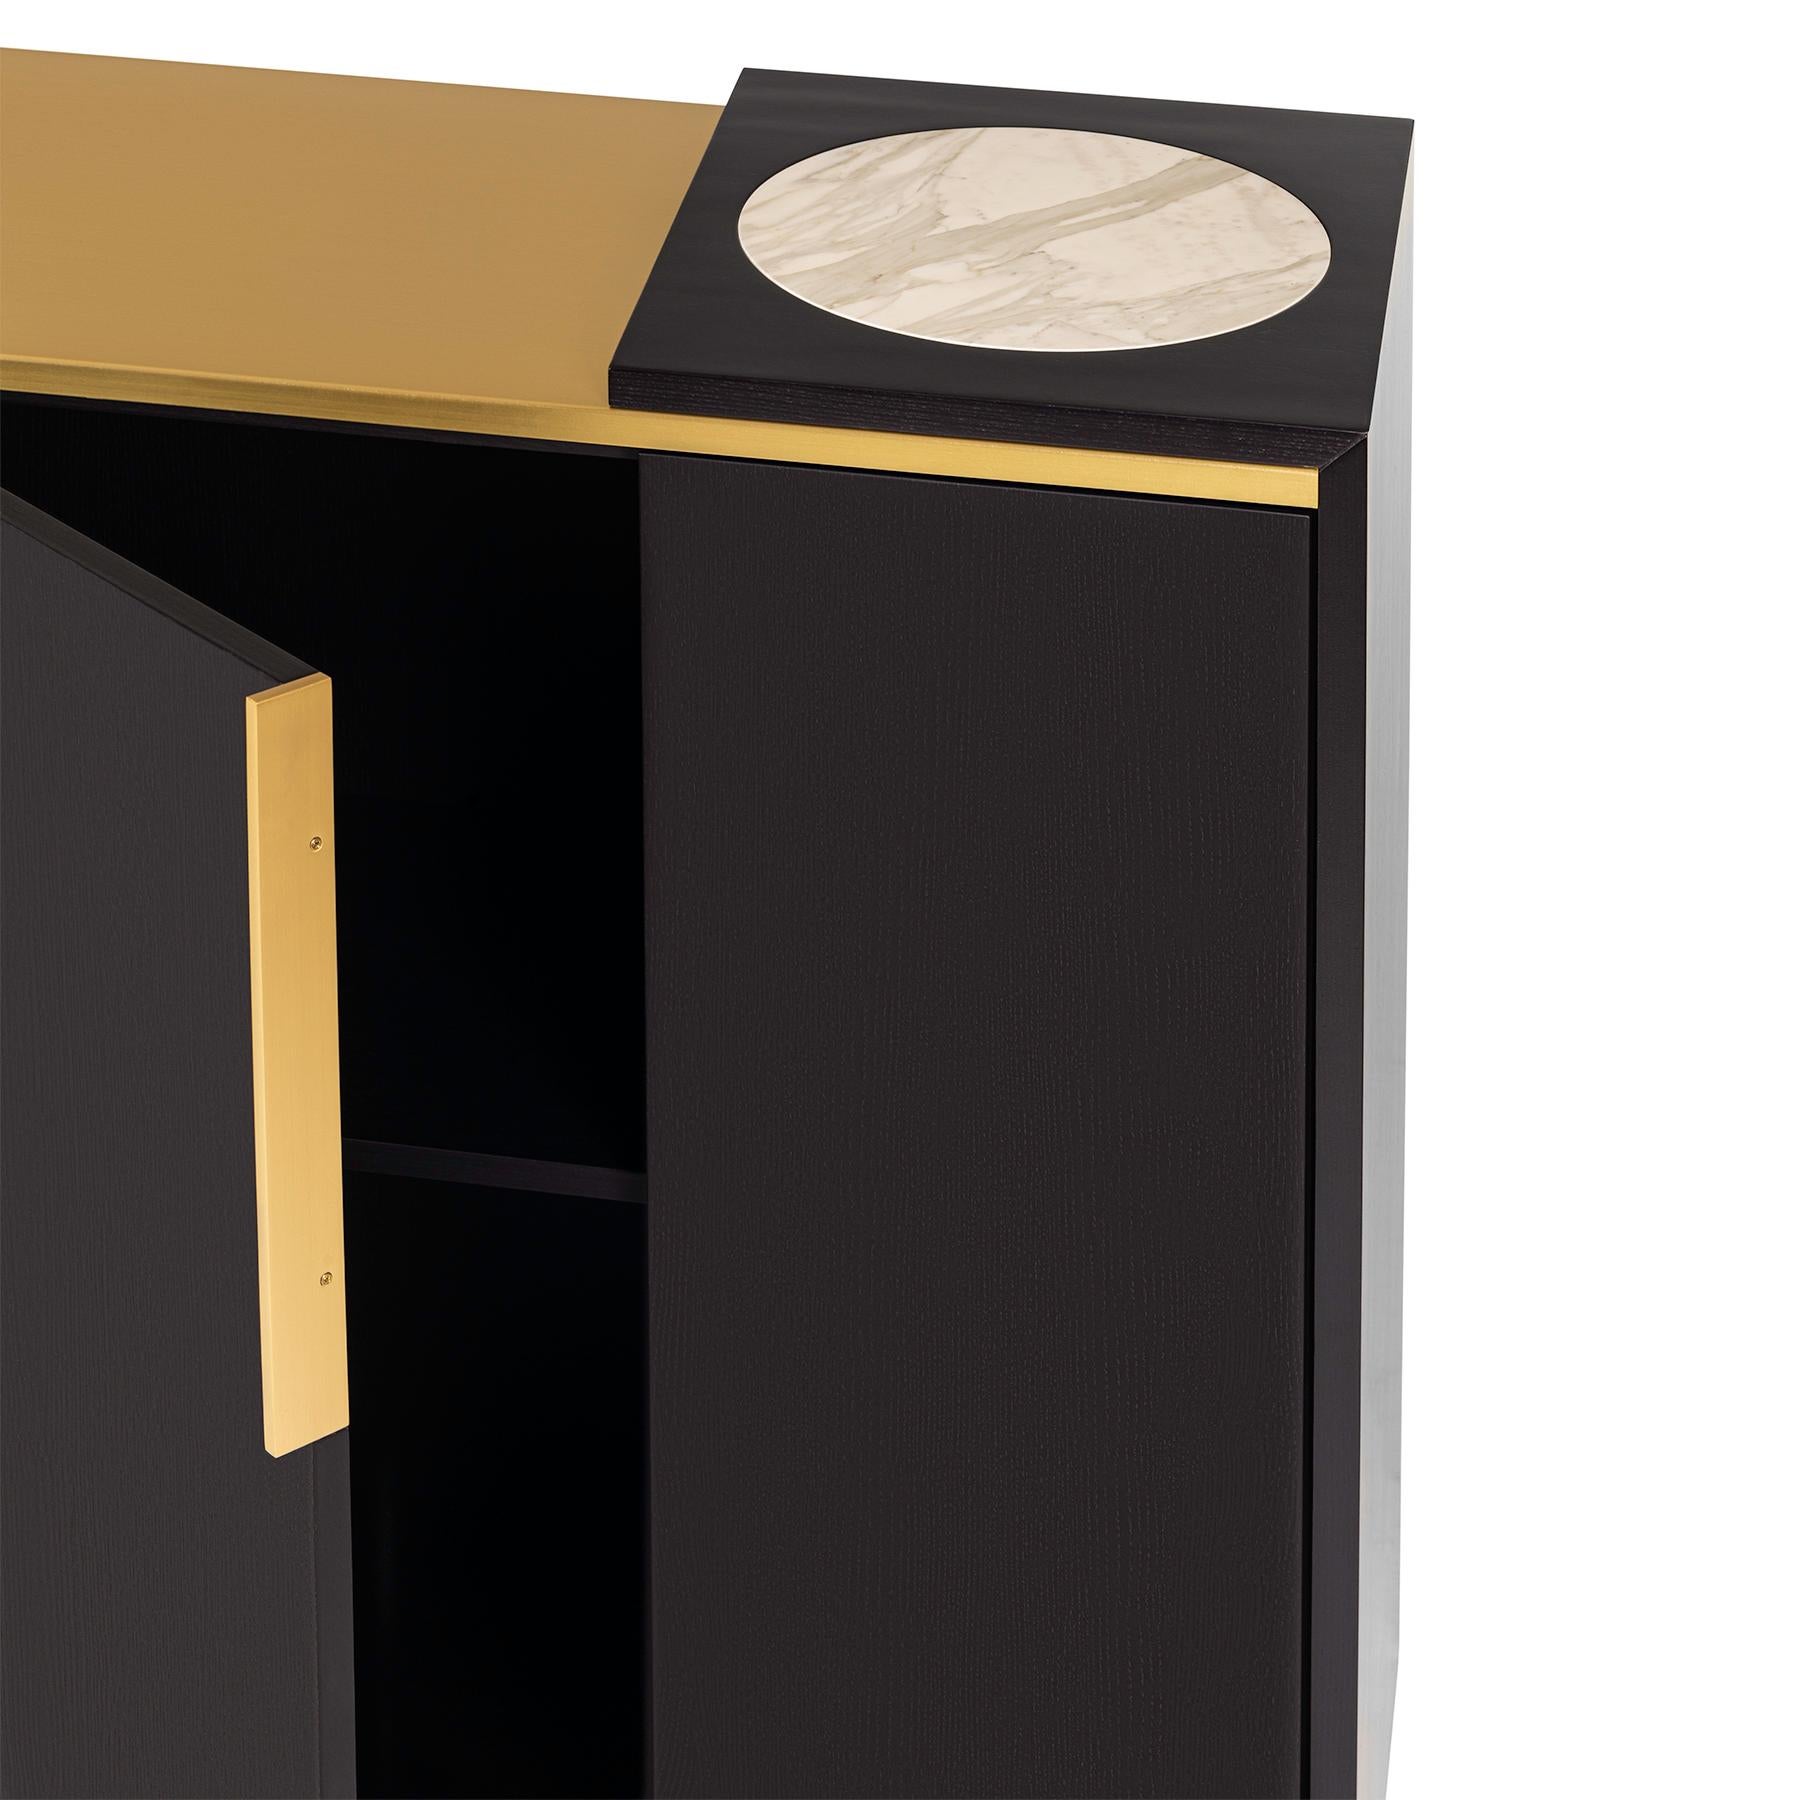 Italian 21st Century Marama Sideboard in Black Ash, Satin Brass, Marble, Made in Italy For Sale